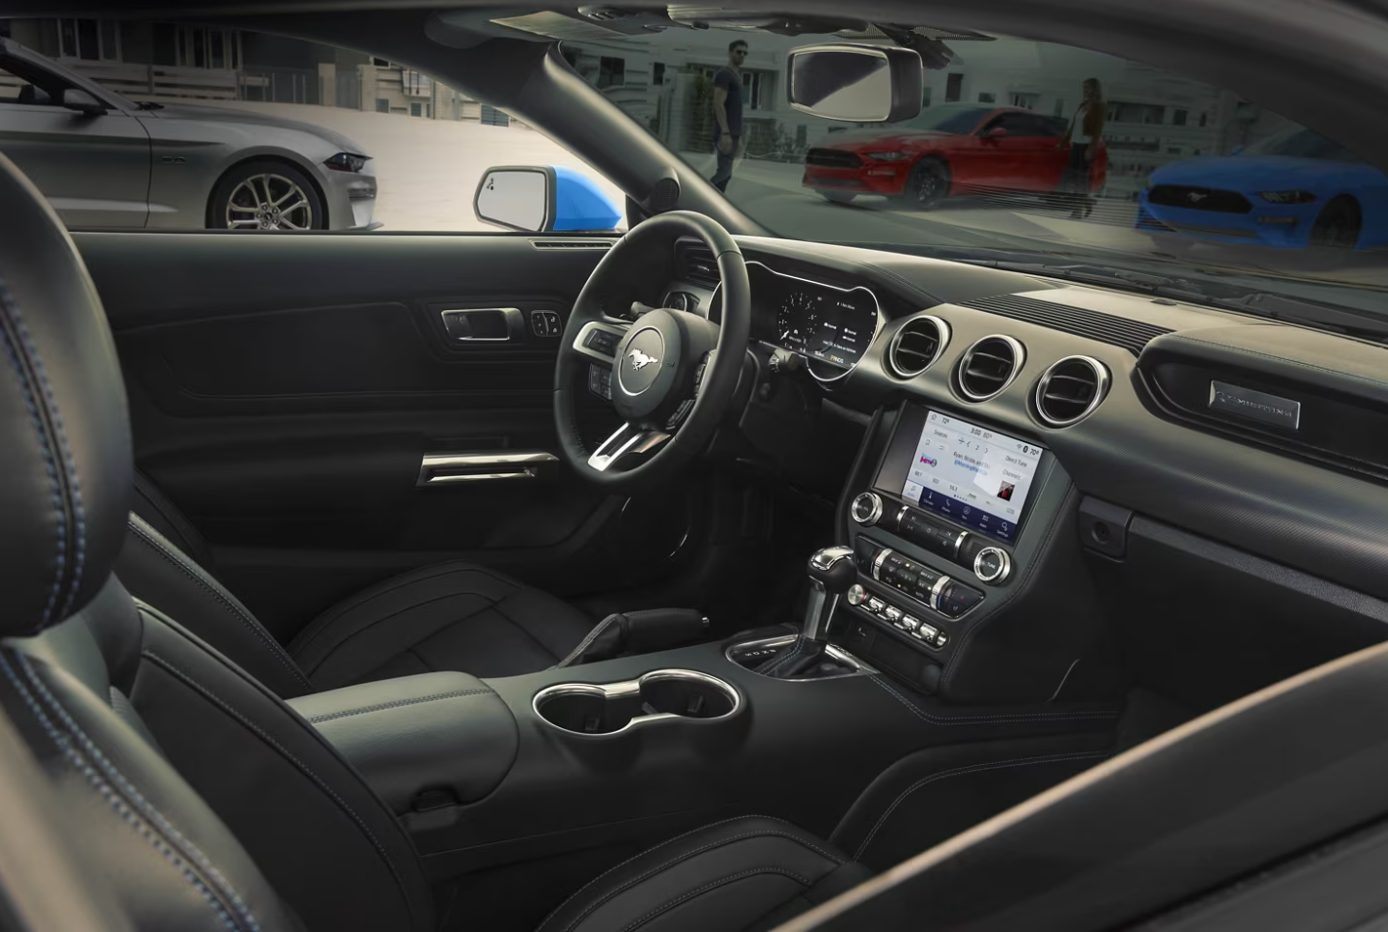 A view of the infotainment and dash of a 2023 Ford Mustang Mach 1